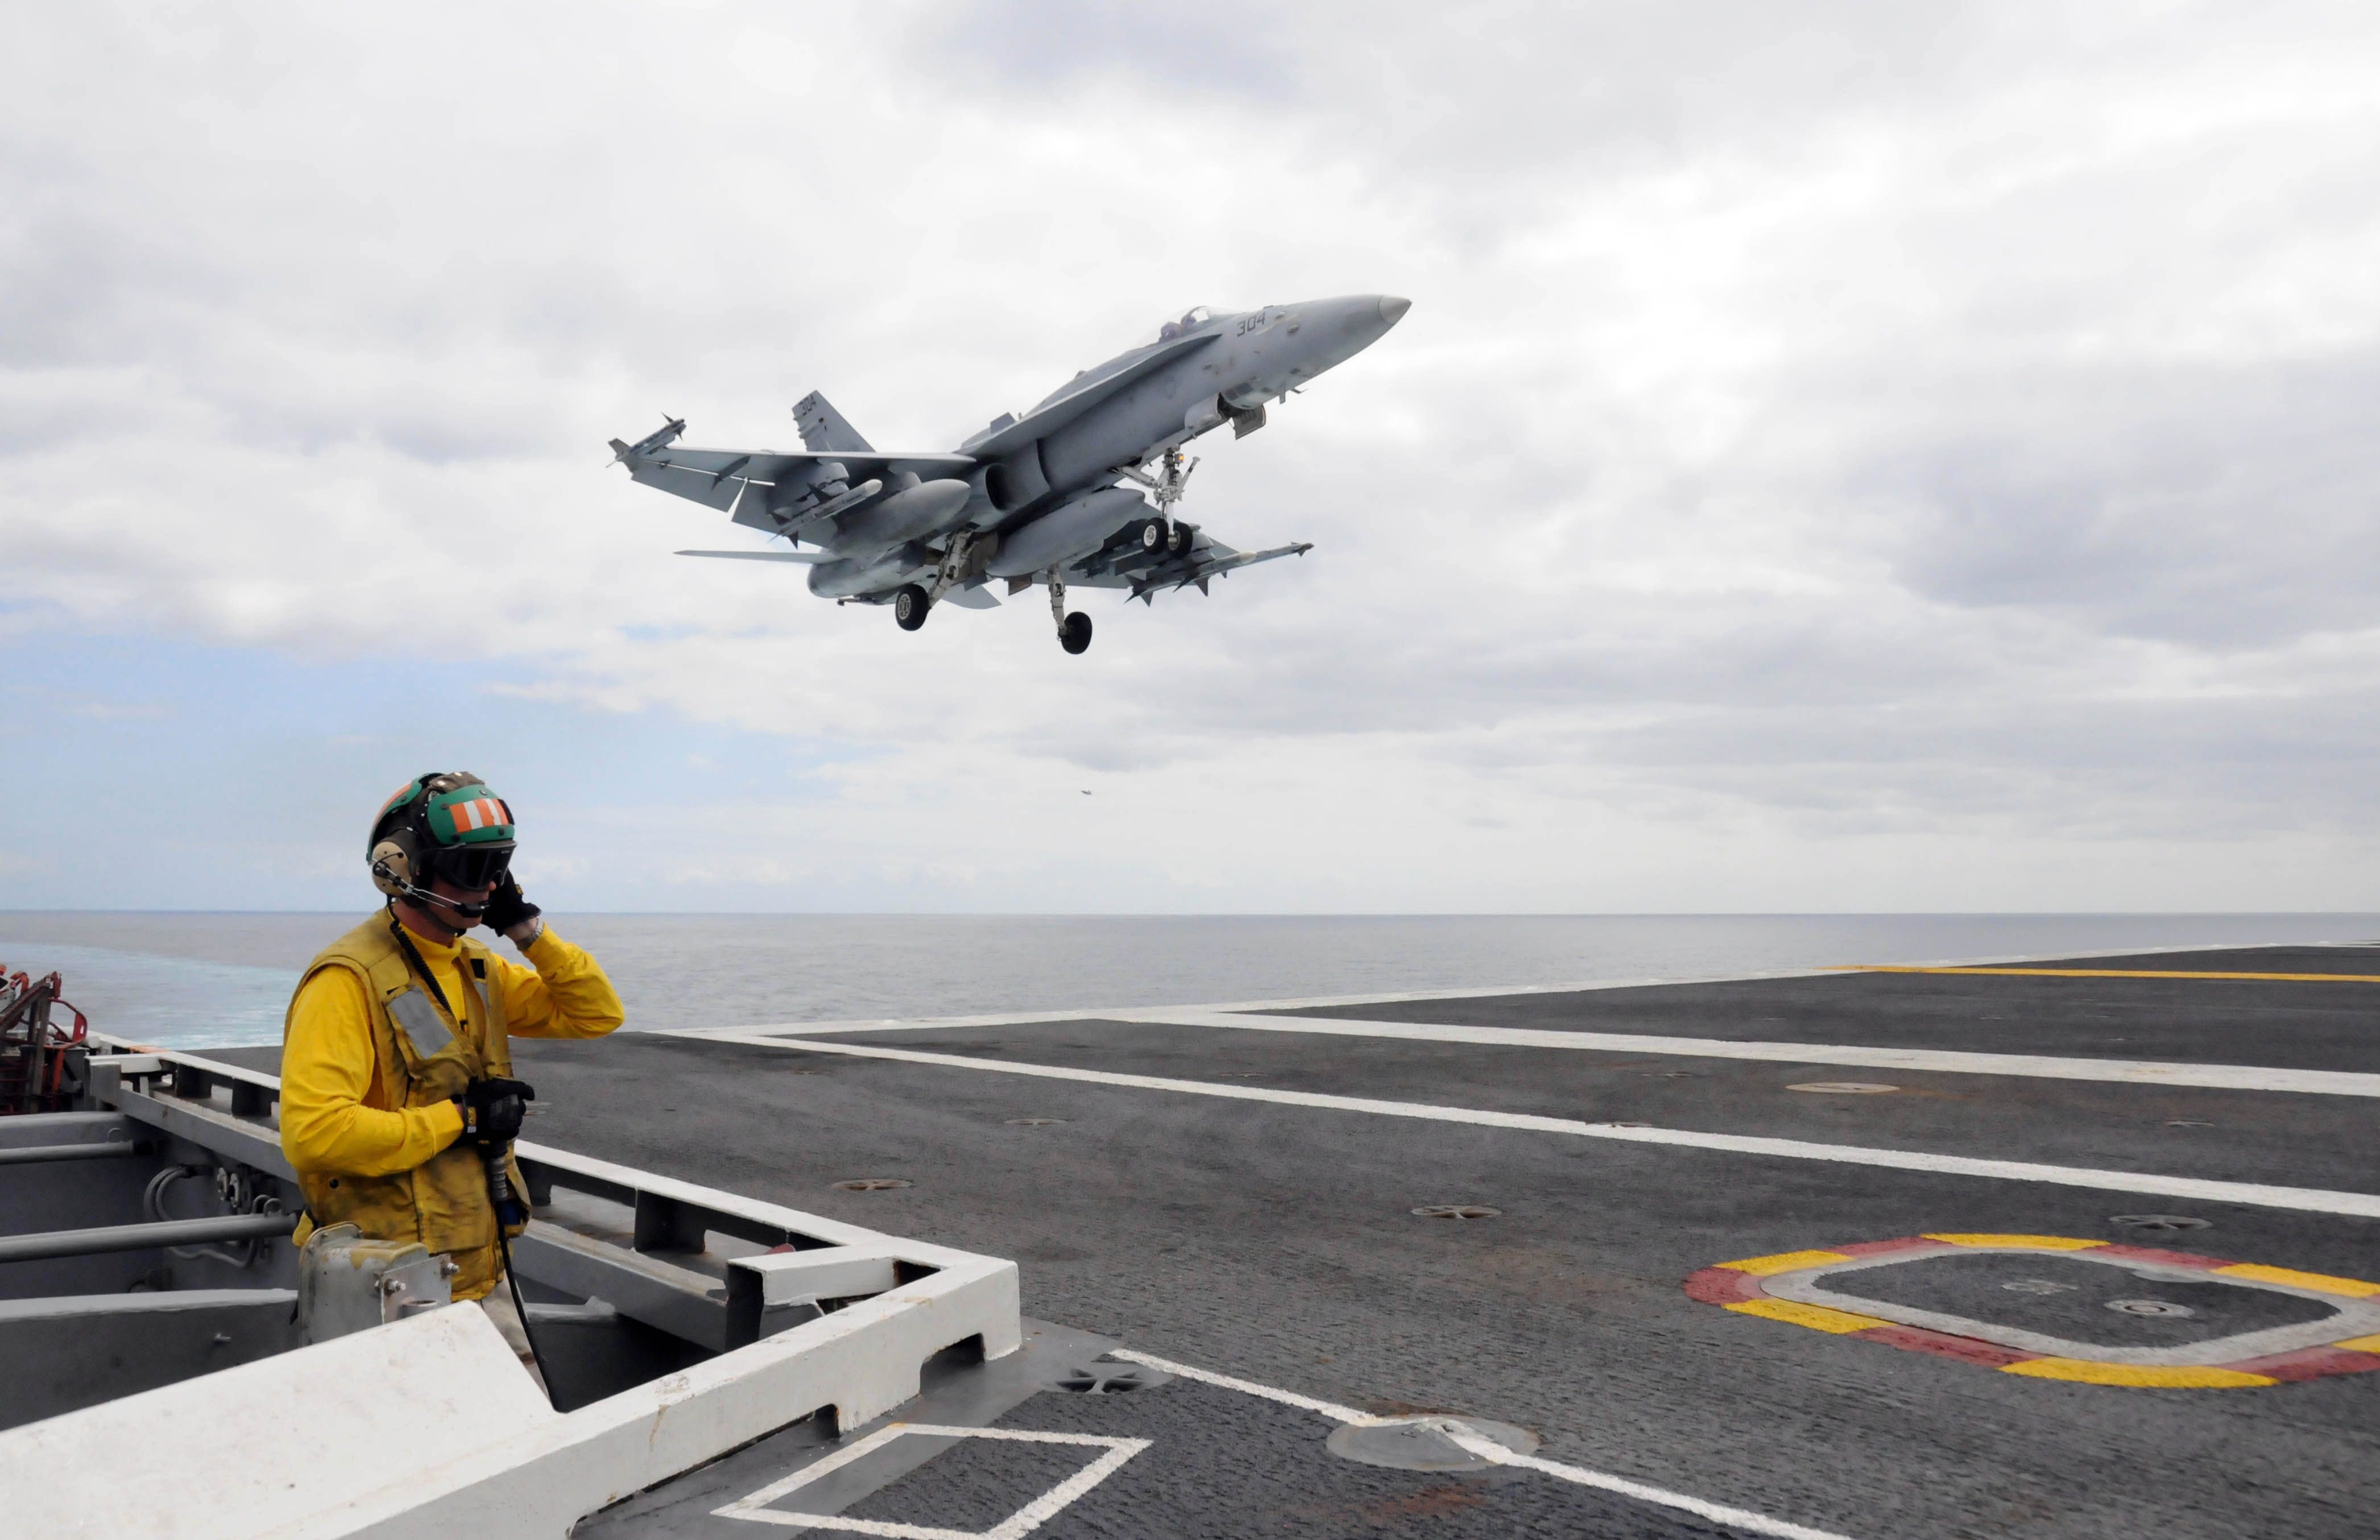     Of A Soldier In Yellow Watching A Jet Land On An Aircraft Carrier